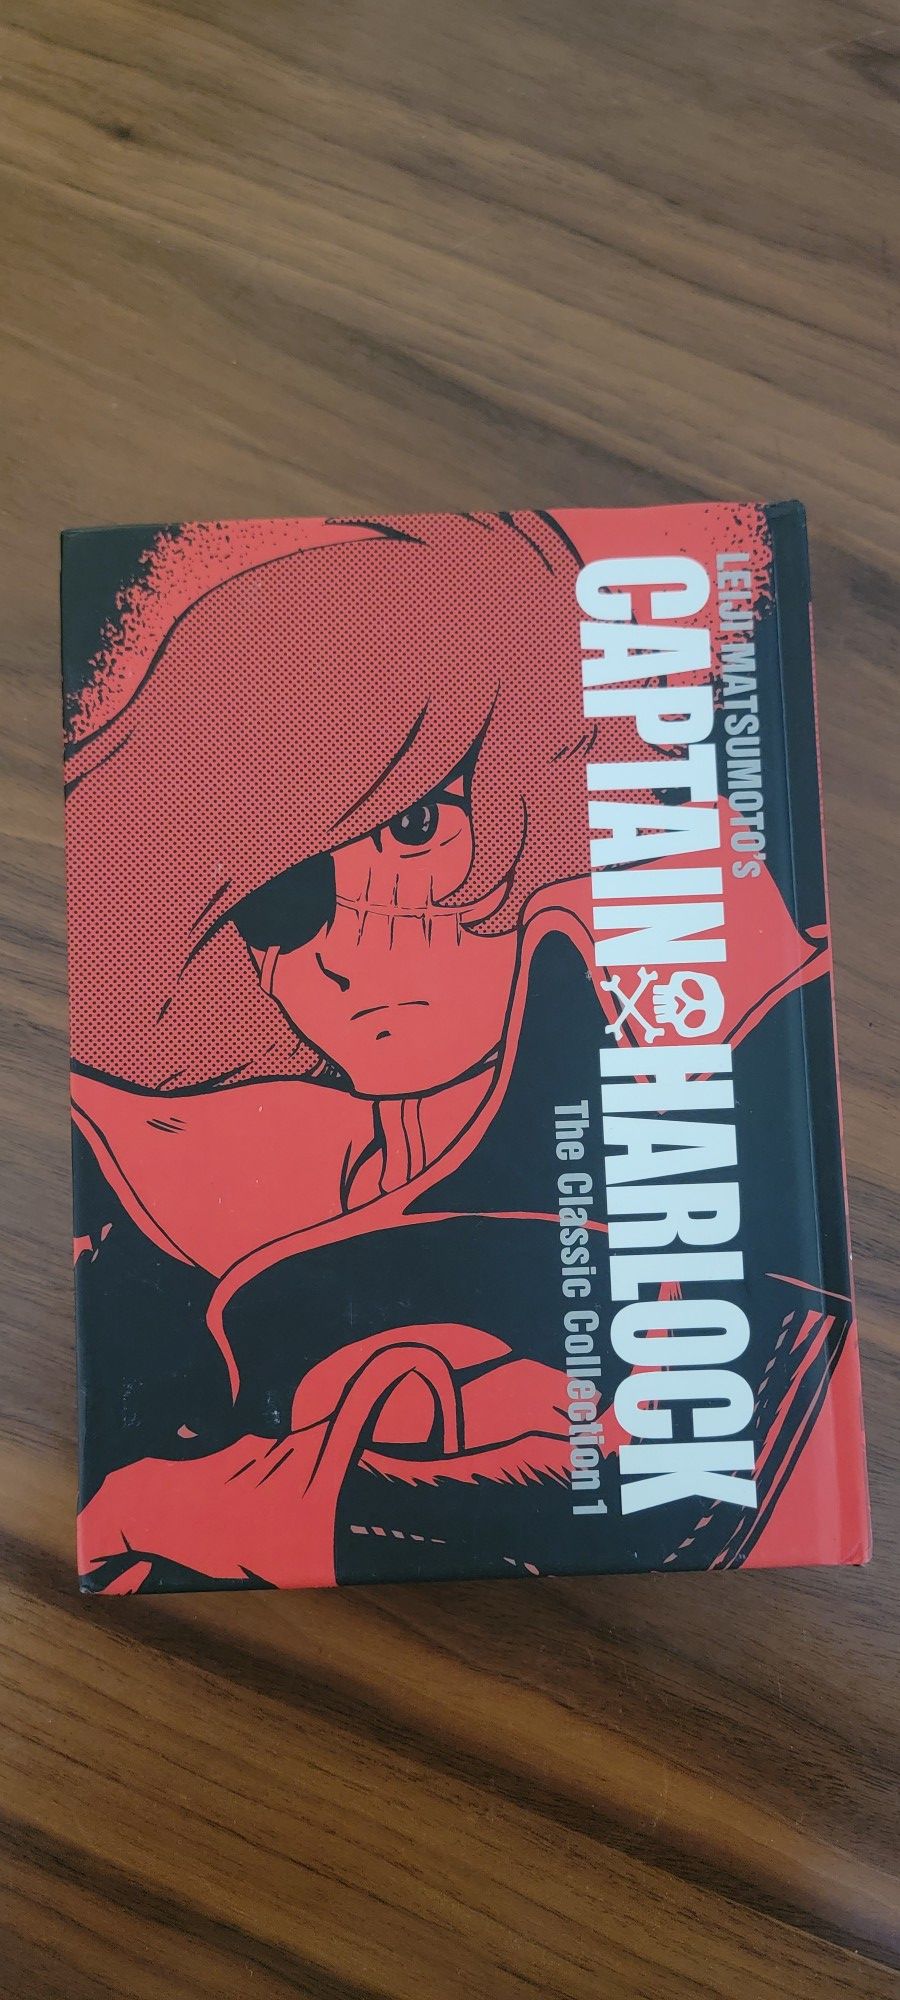 Captain Harlock: The Classic Collection Vol. 1

